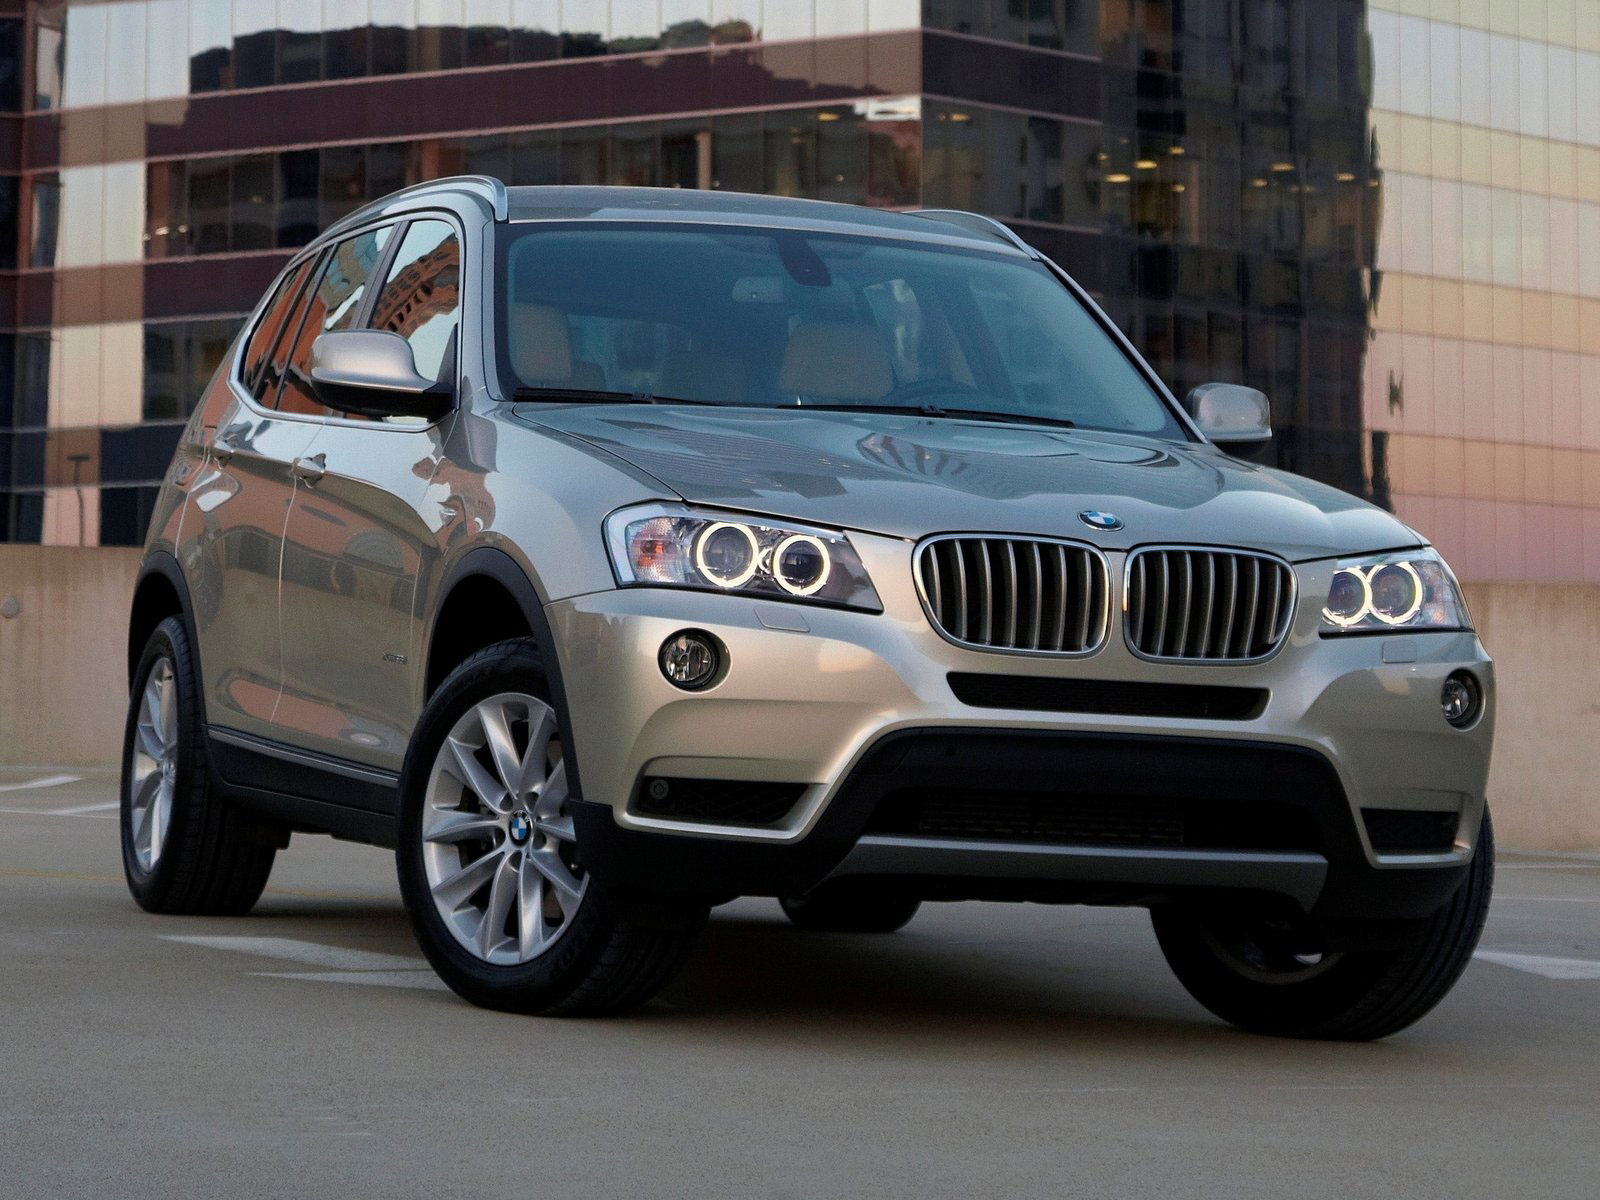 Cars Review: New BMW X3 xDrive35i 2011 price in Canada, Specifications ...